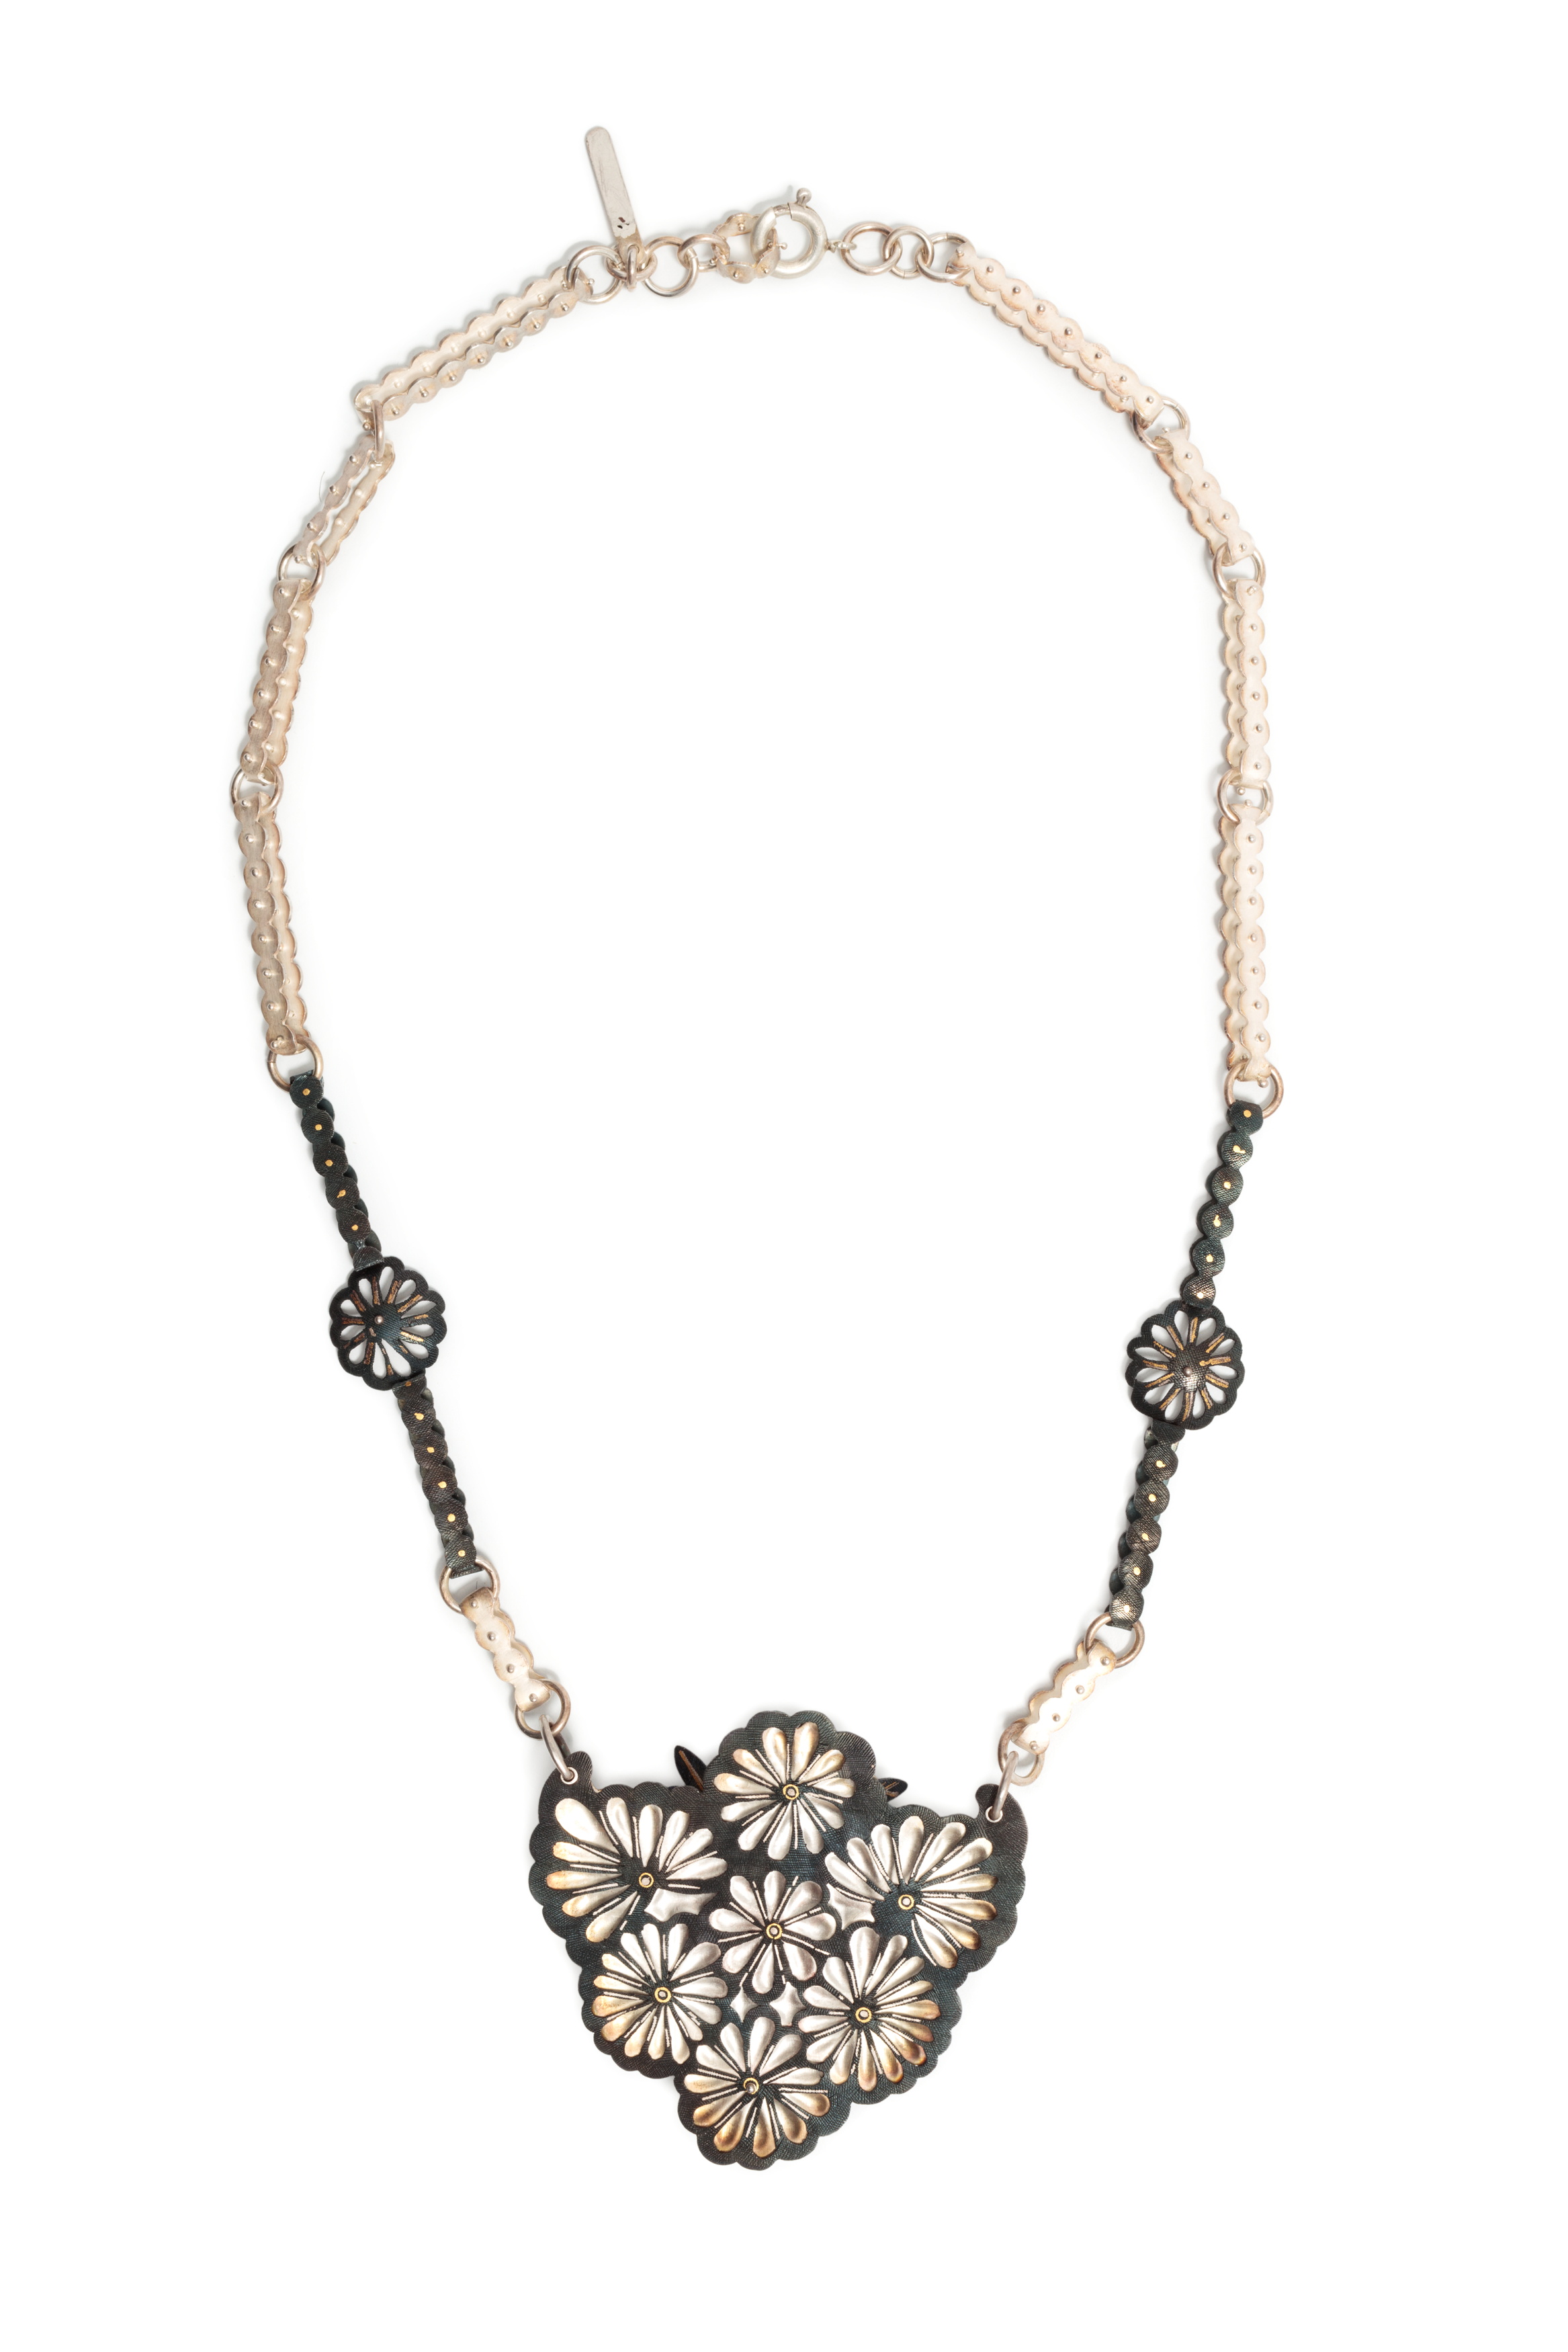 'Blossom' necklace by Joungmee Do